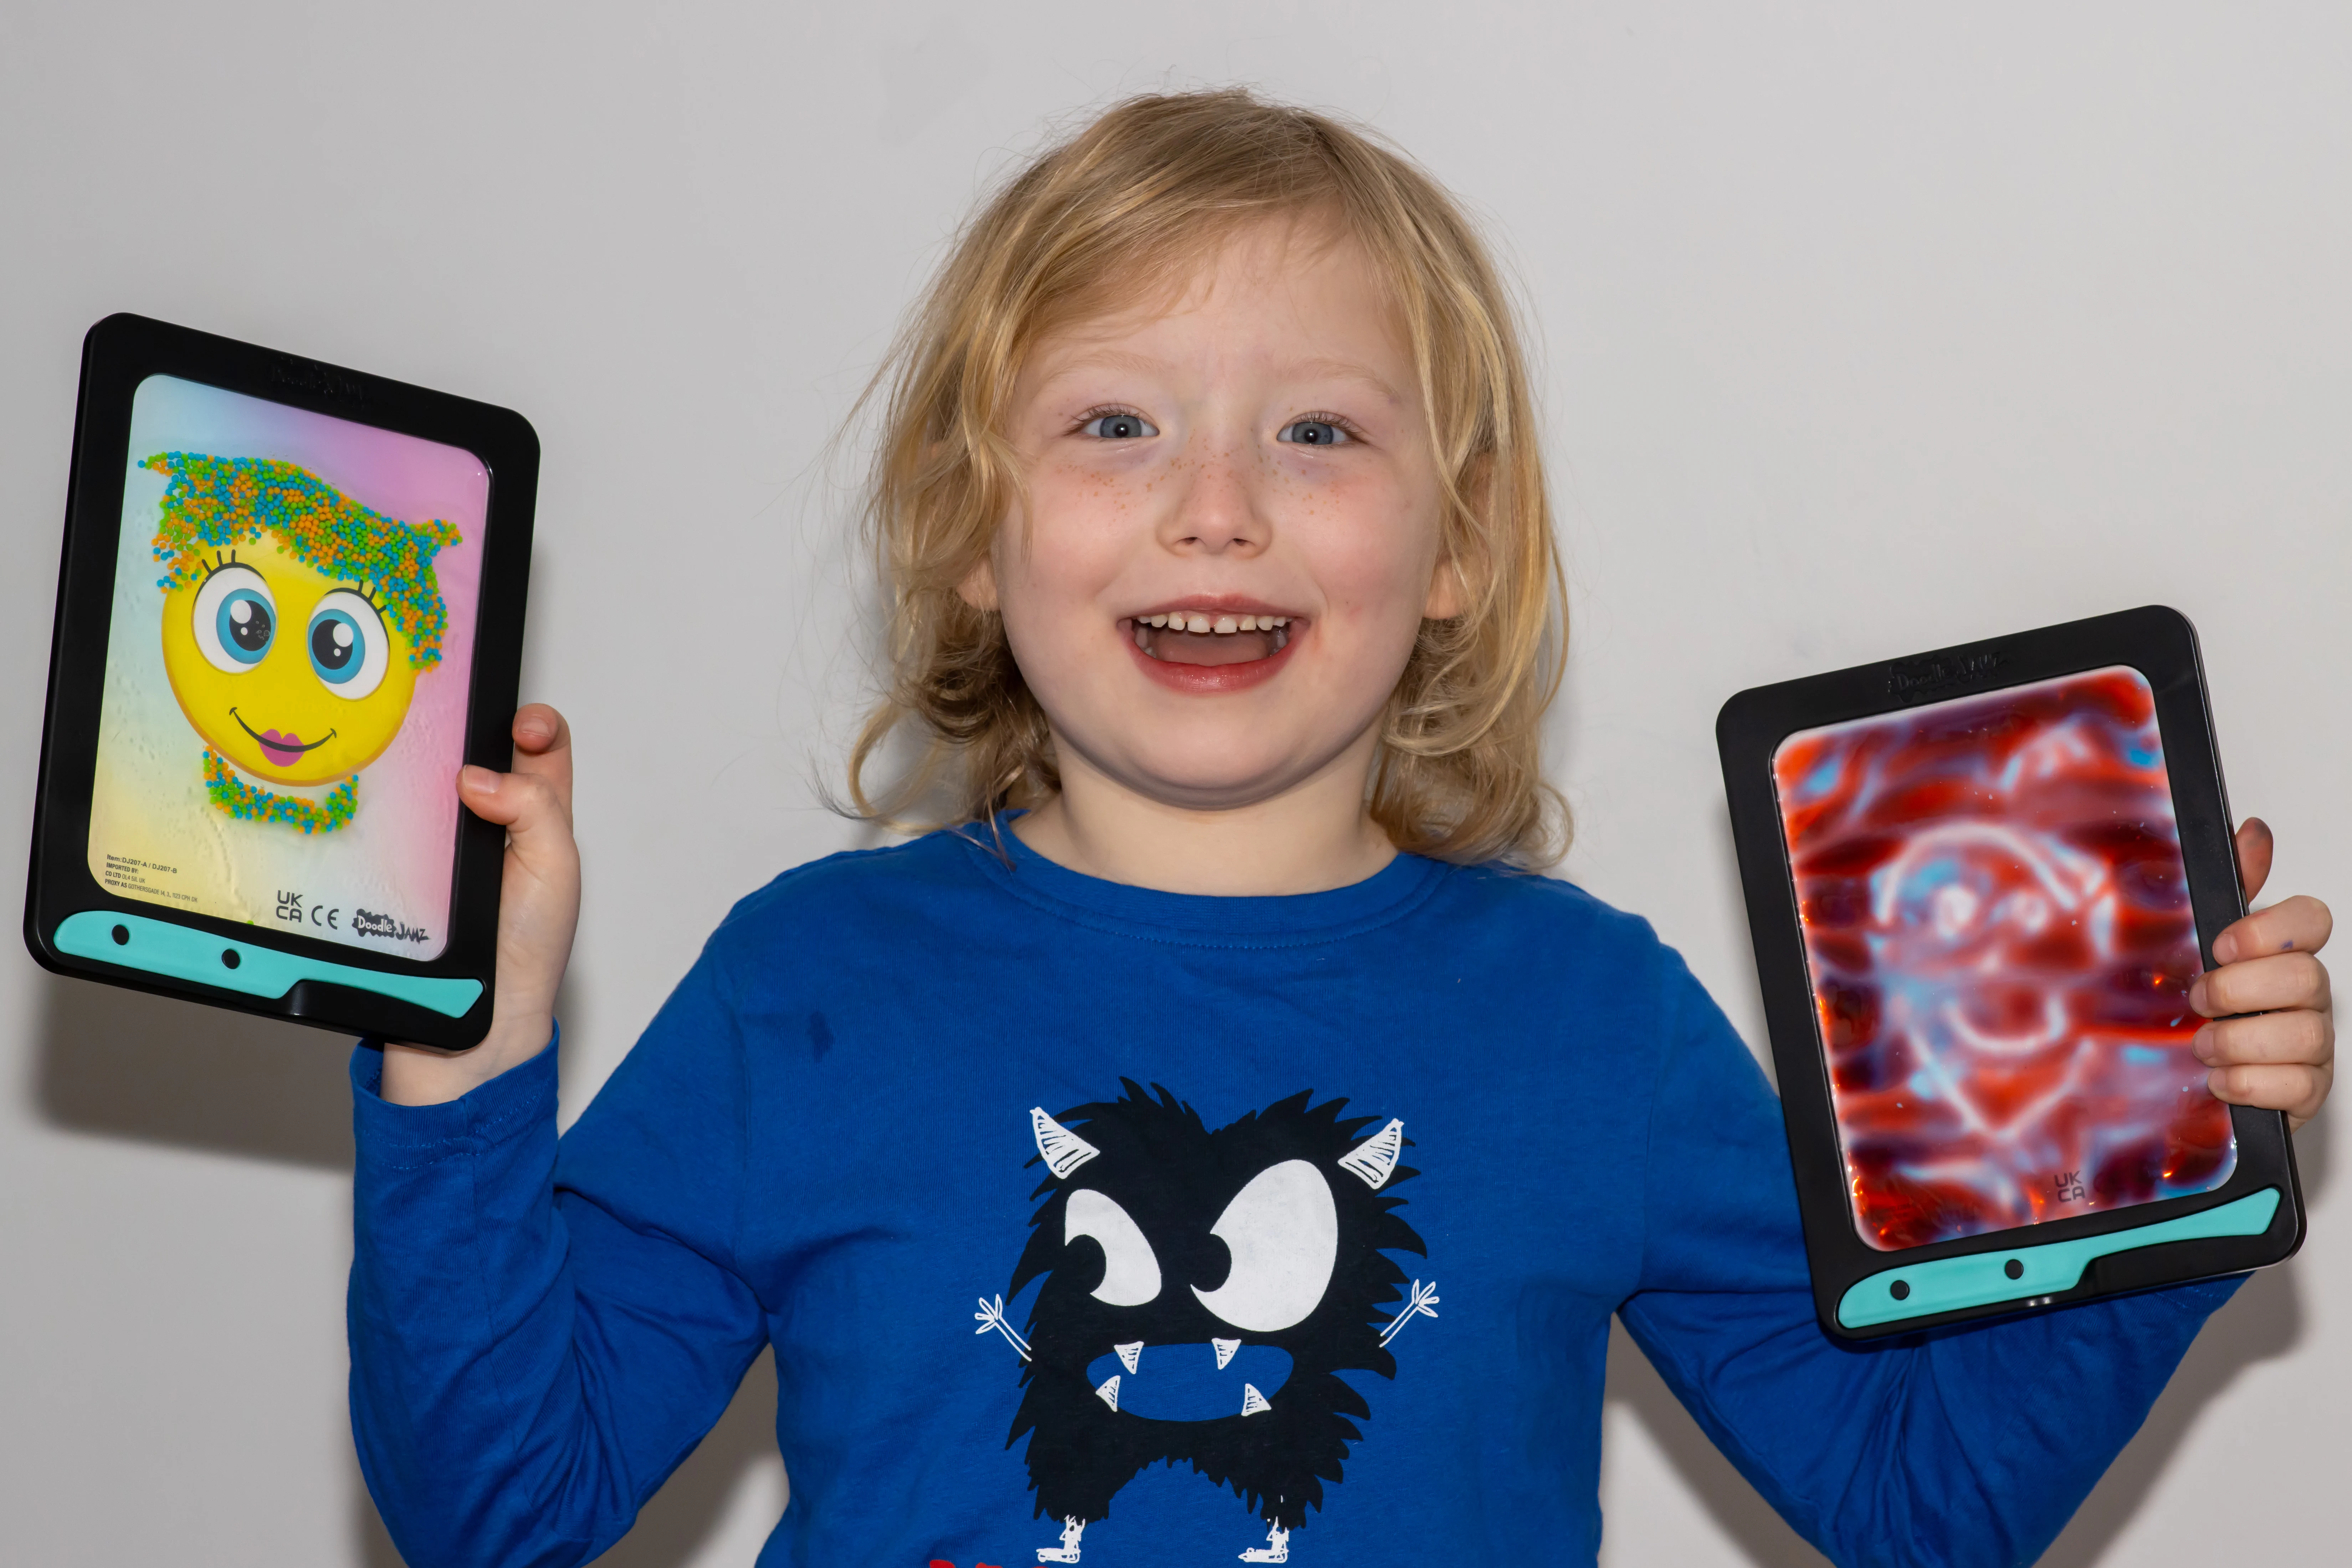 A 6 year old girl holding up DoodleJamz boards showing the Jellypic and Jellyboard